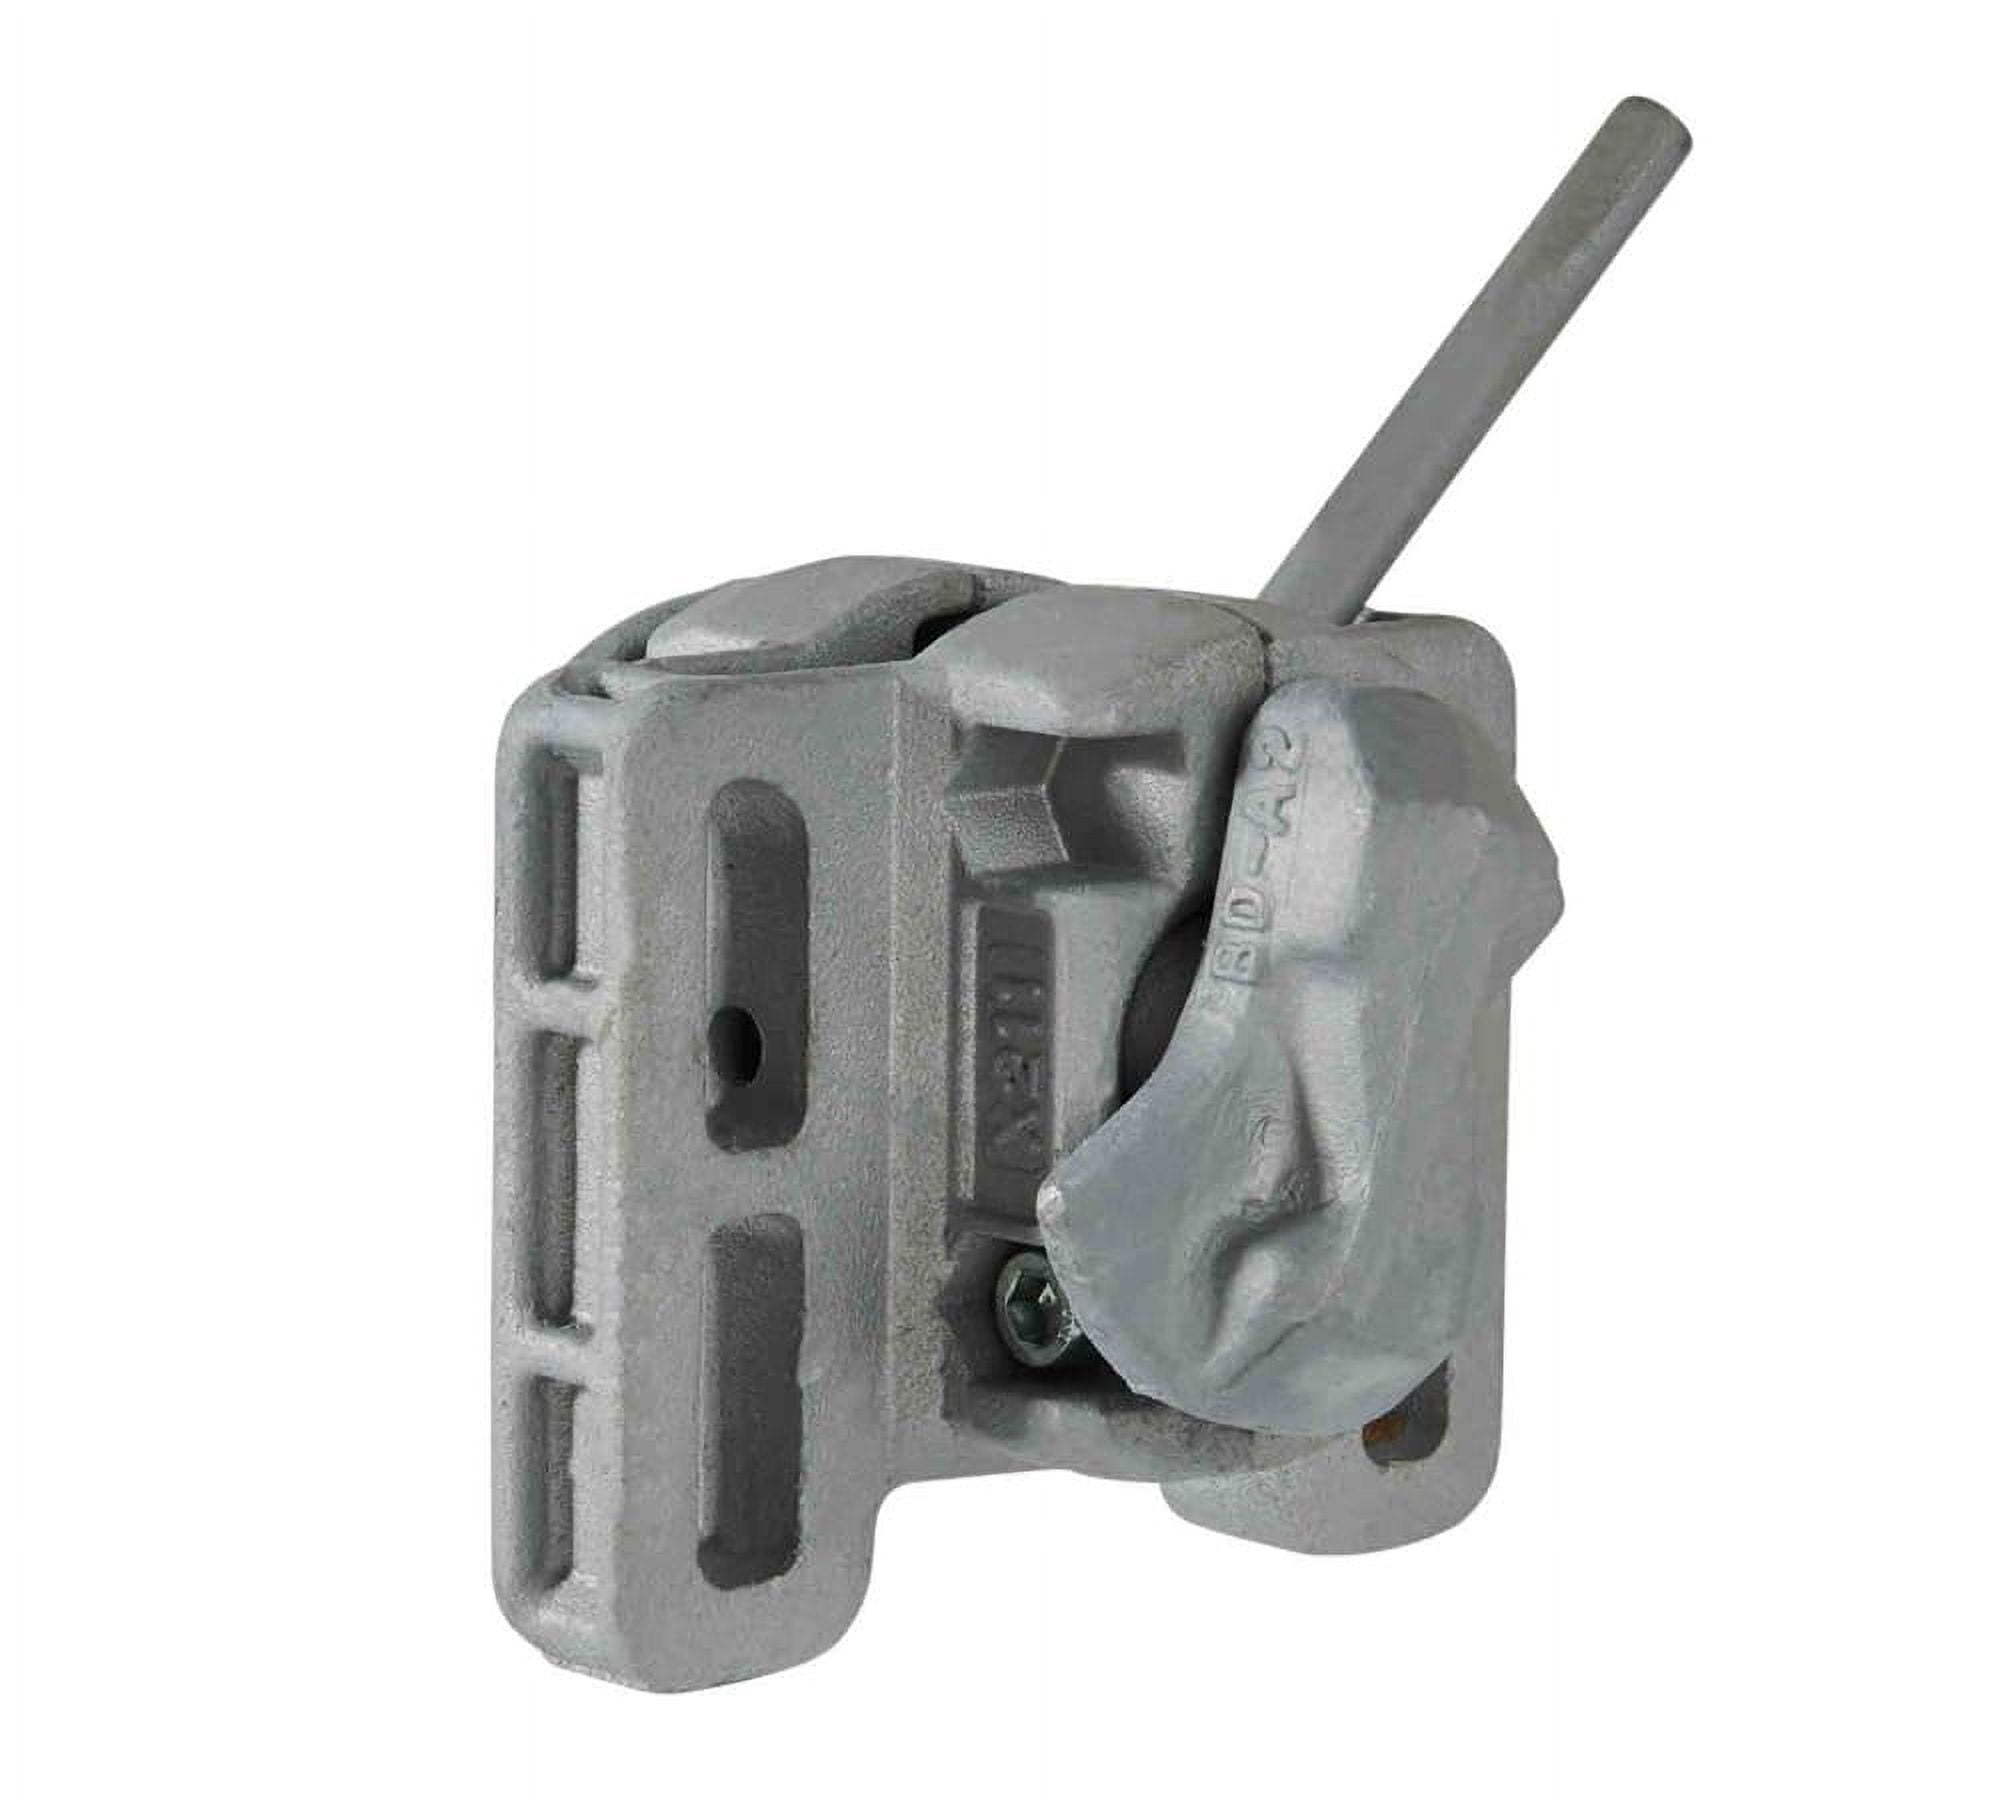 CONTAINER MANUAL TWIST LOCK : BD-A2 – Gulf Safety